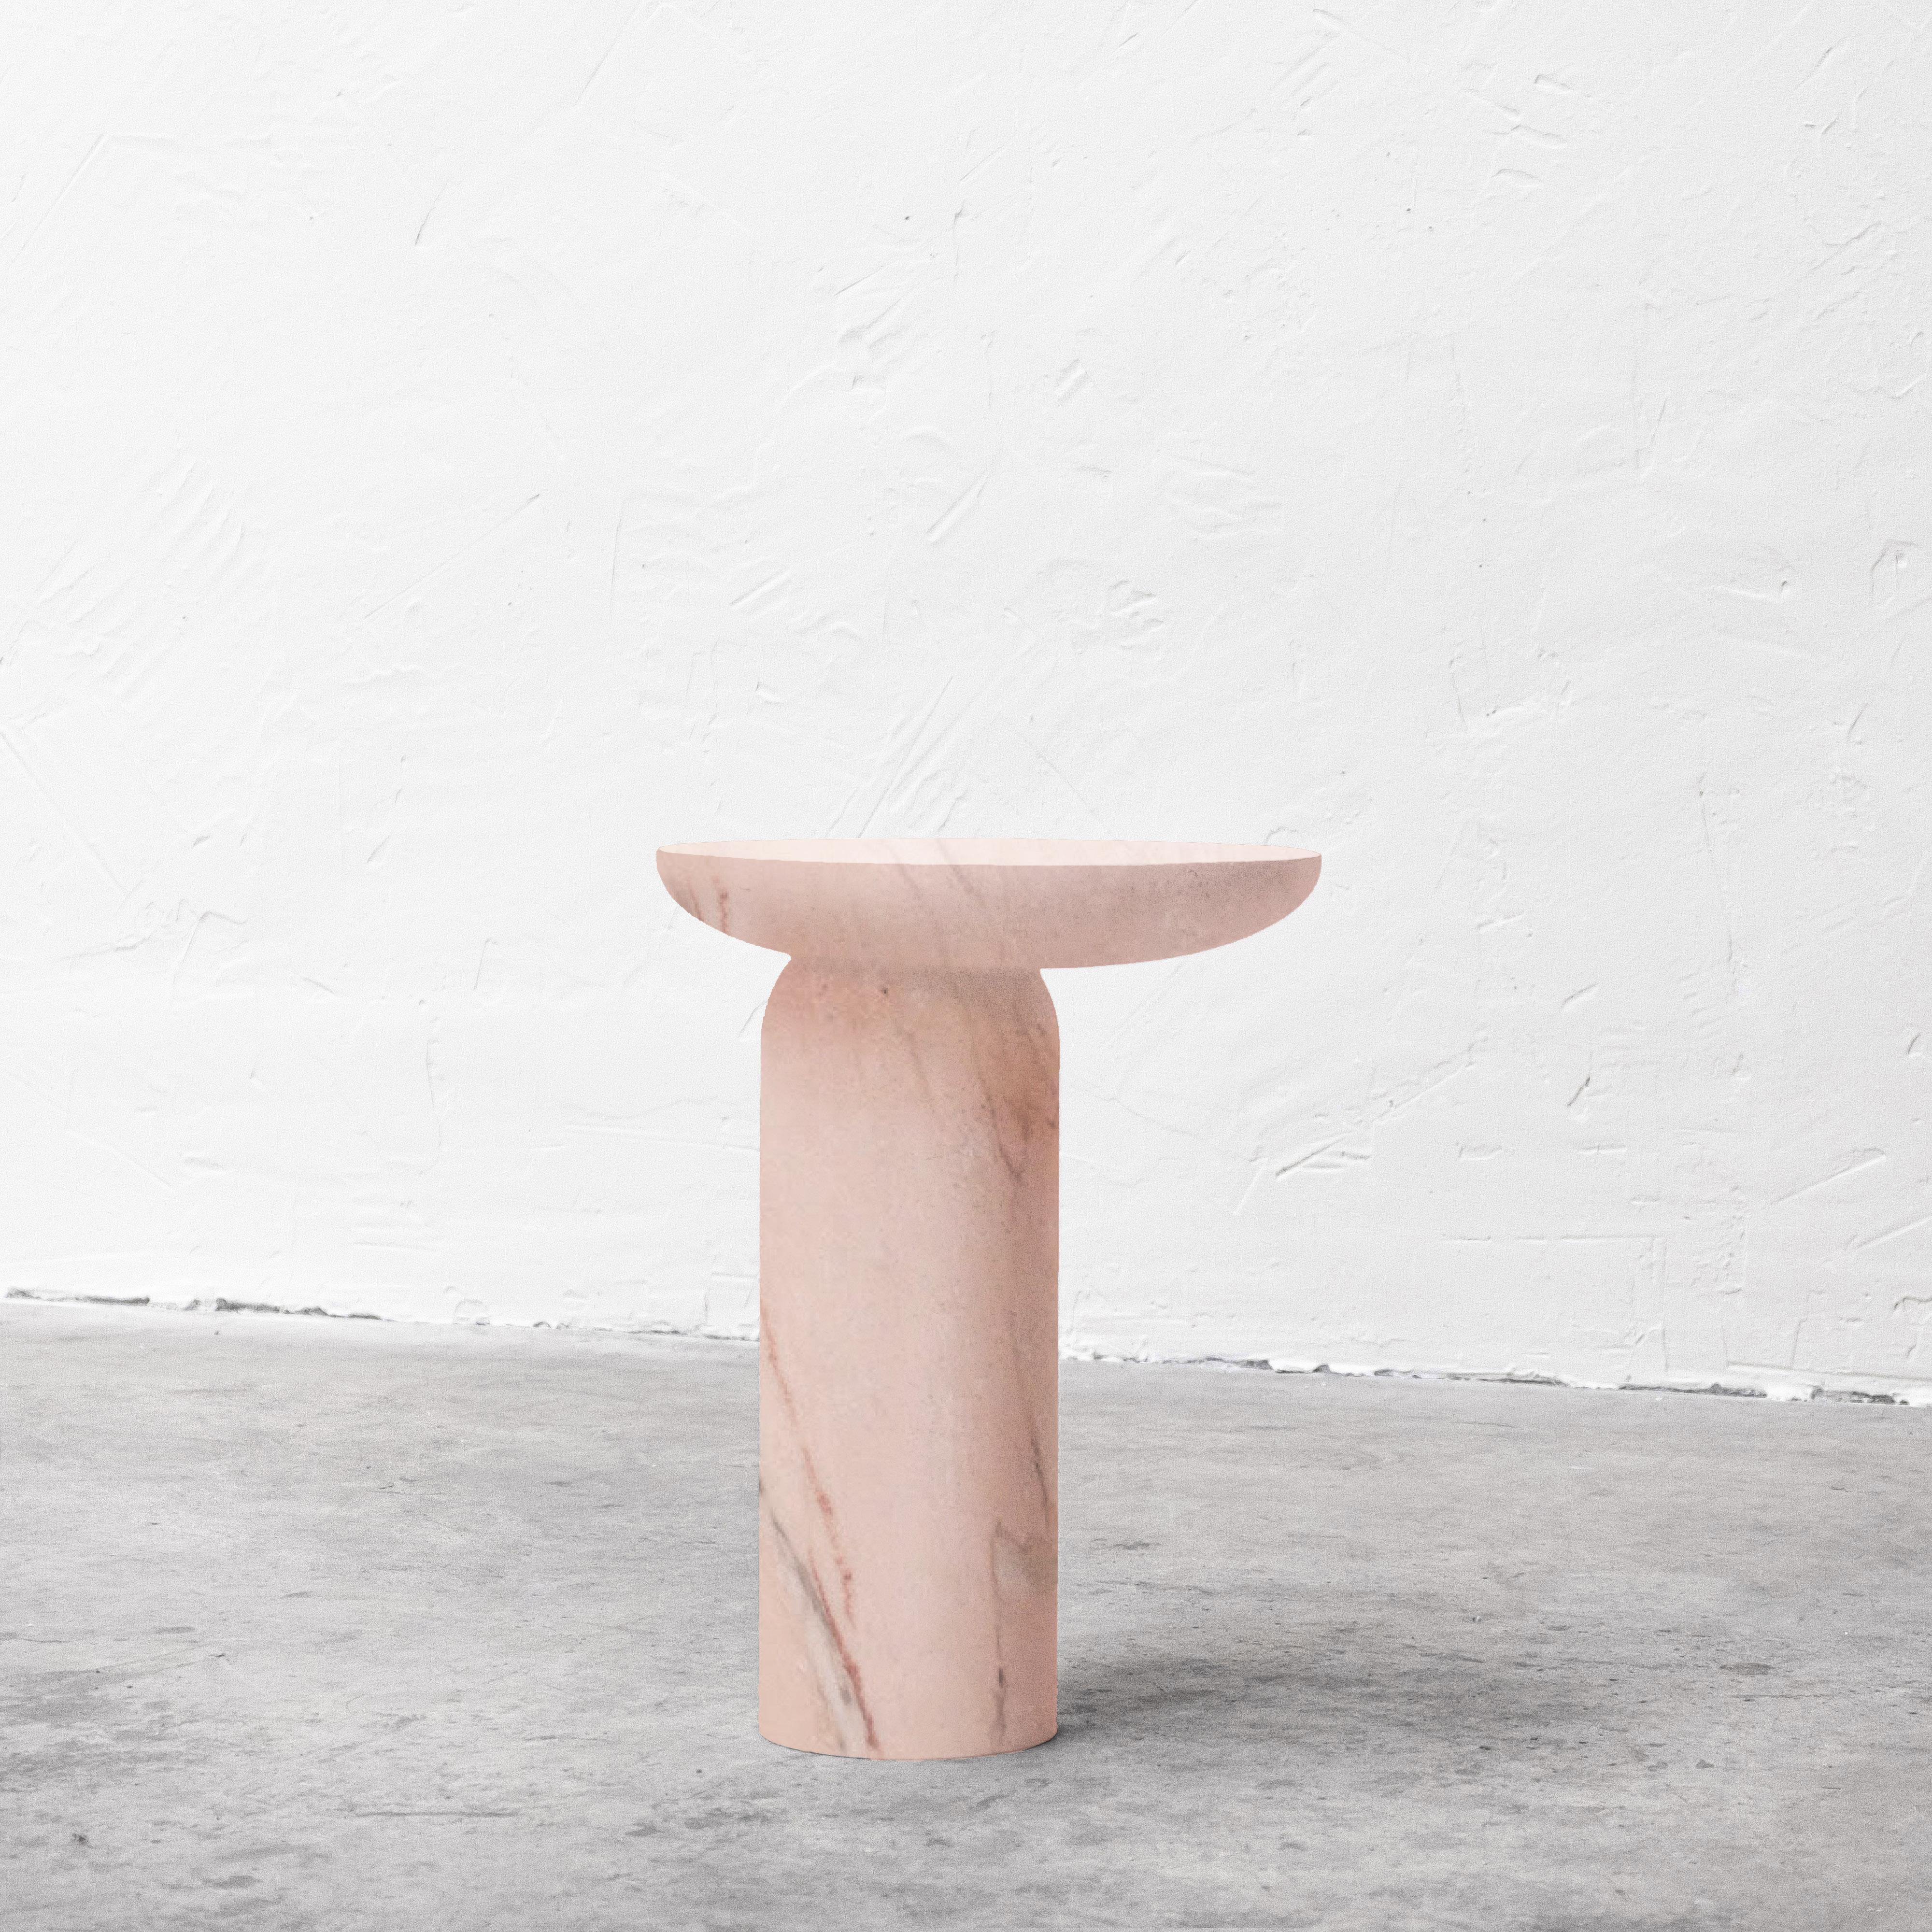 Decomplexe, Pink Marble Side Table Sculpted by Frederic Saulou
Limited Edition
Materials: Pink Marble
Dimensions: H 50 x D 38 cm. 
 
